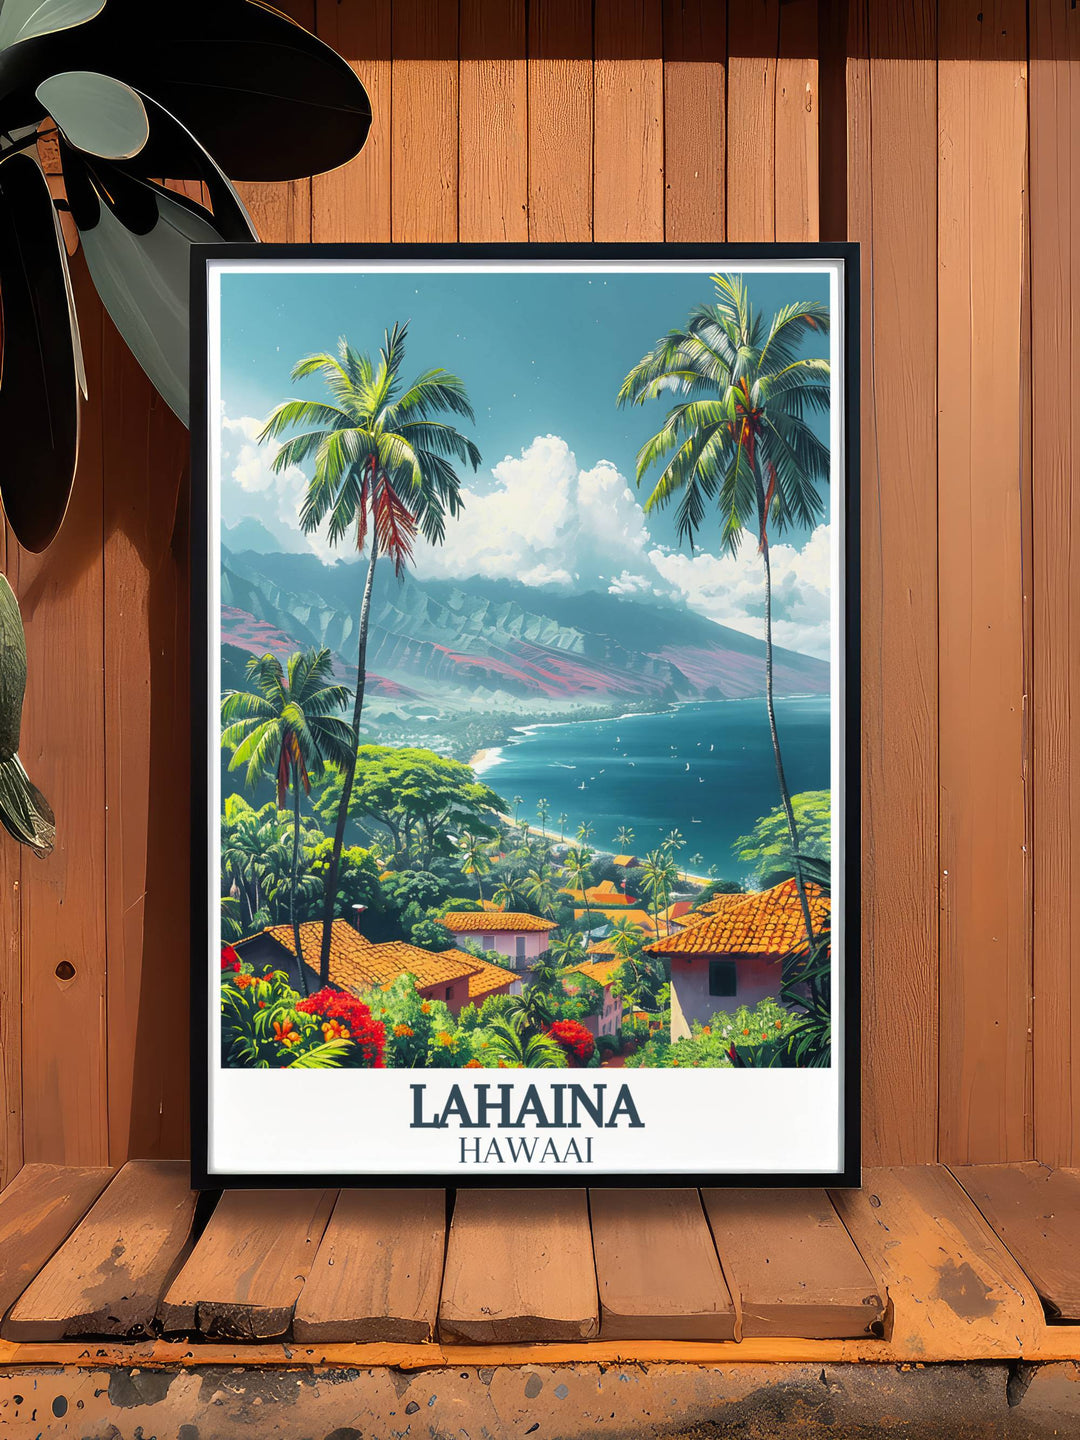 Gallery quality Lahaina wall art showcasing detailed artwork of Hawaiian landscapes and cultural scenes, perfect for home or office decor.